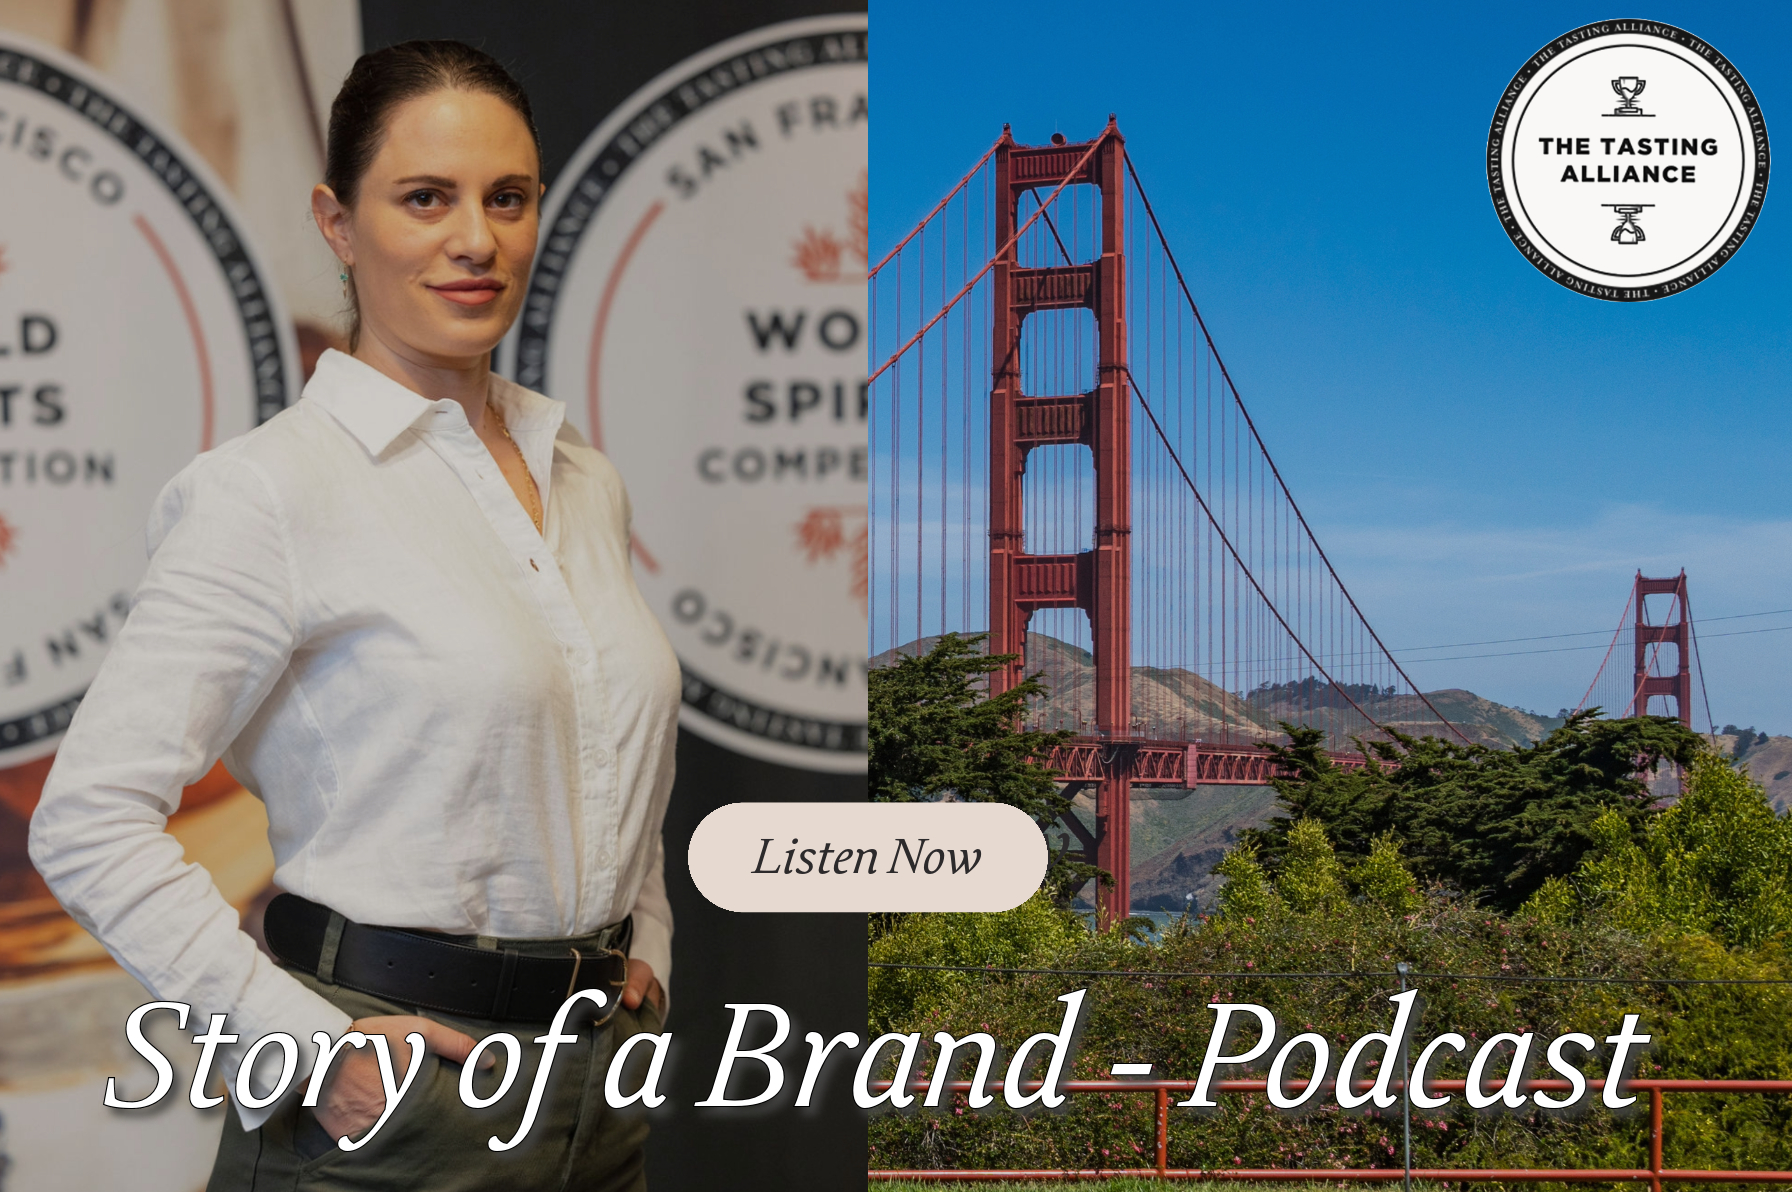 Amanda Blue from The Tasting Alliance featured on the Story of a Brand Podcast